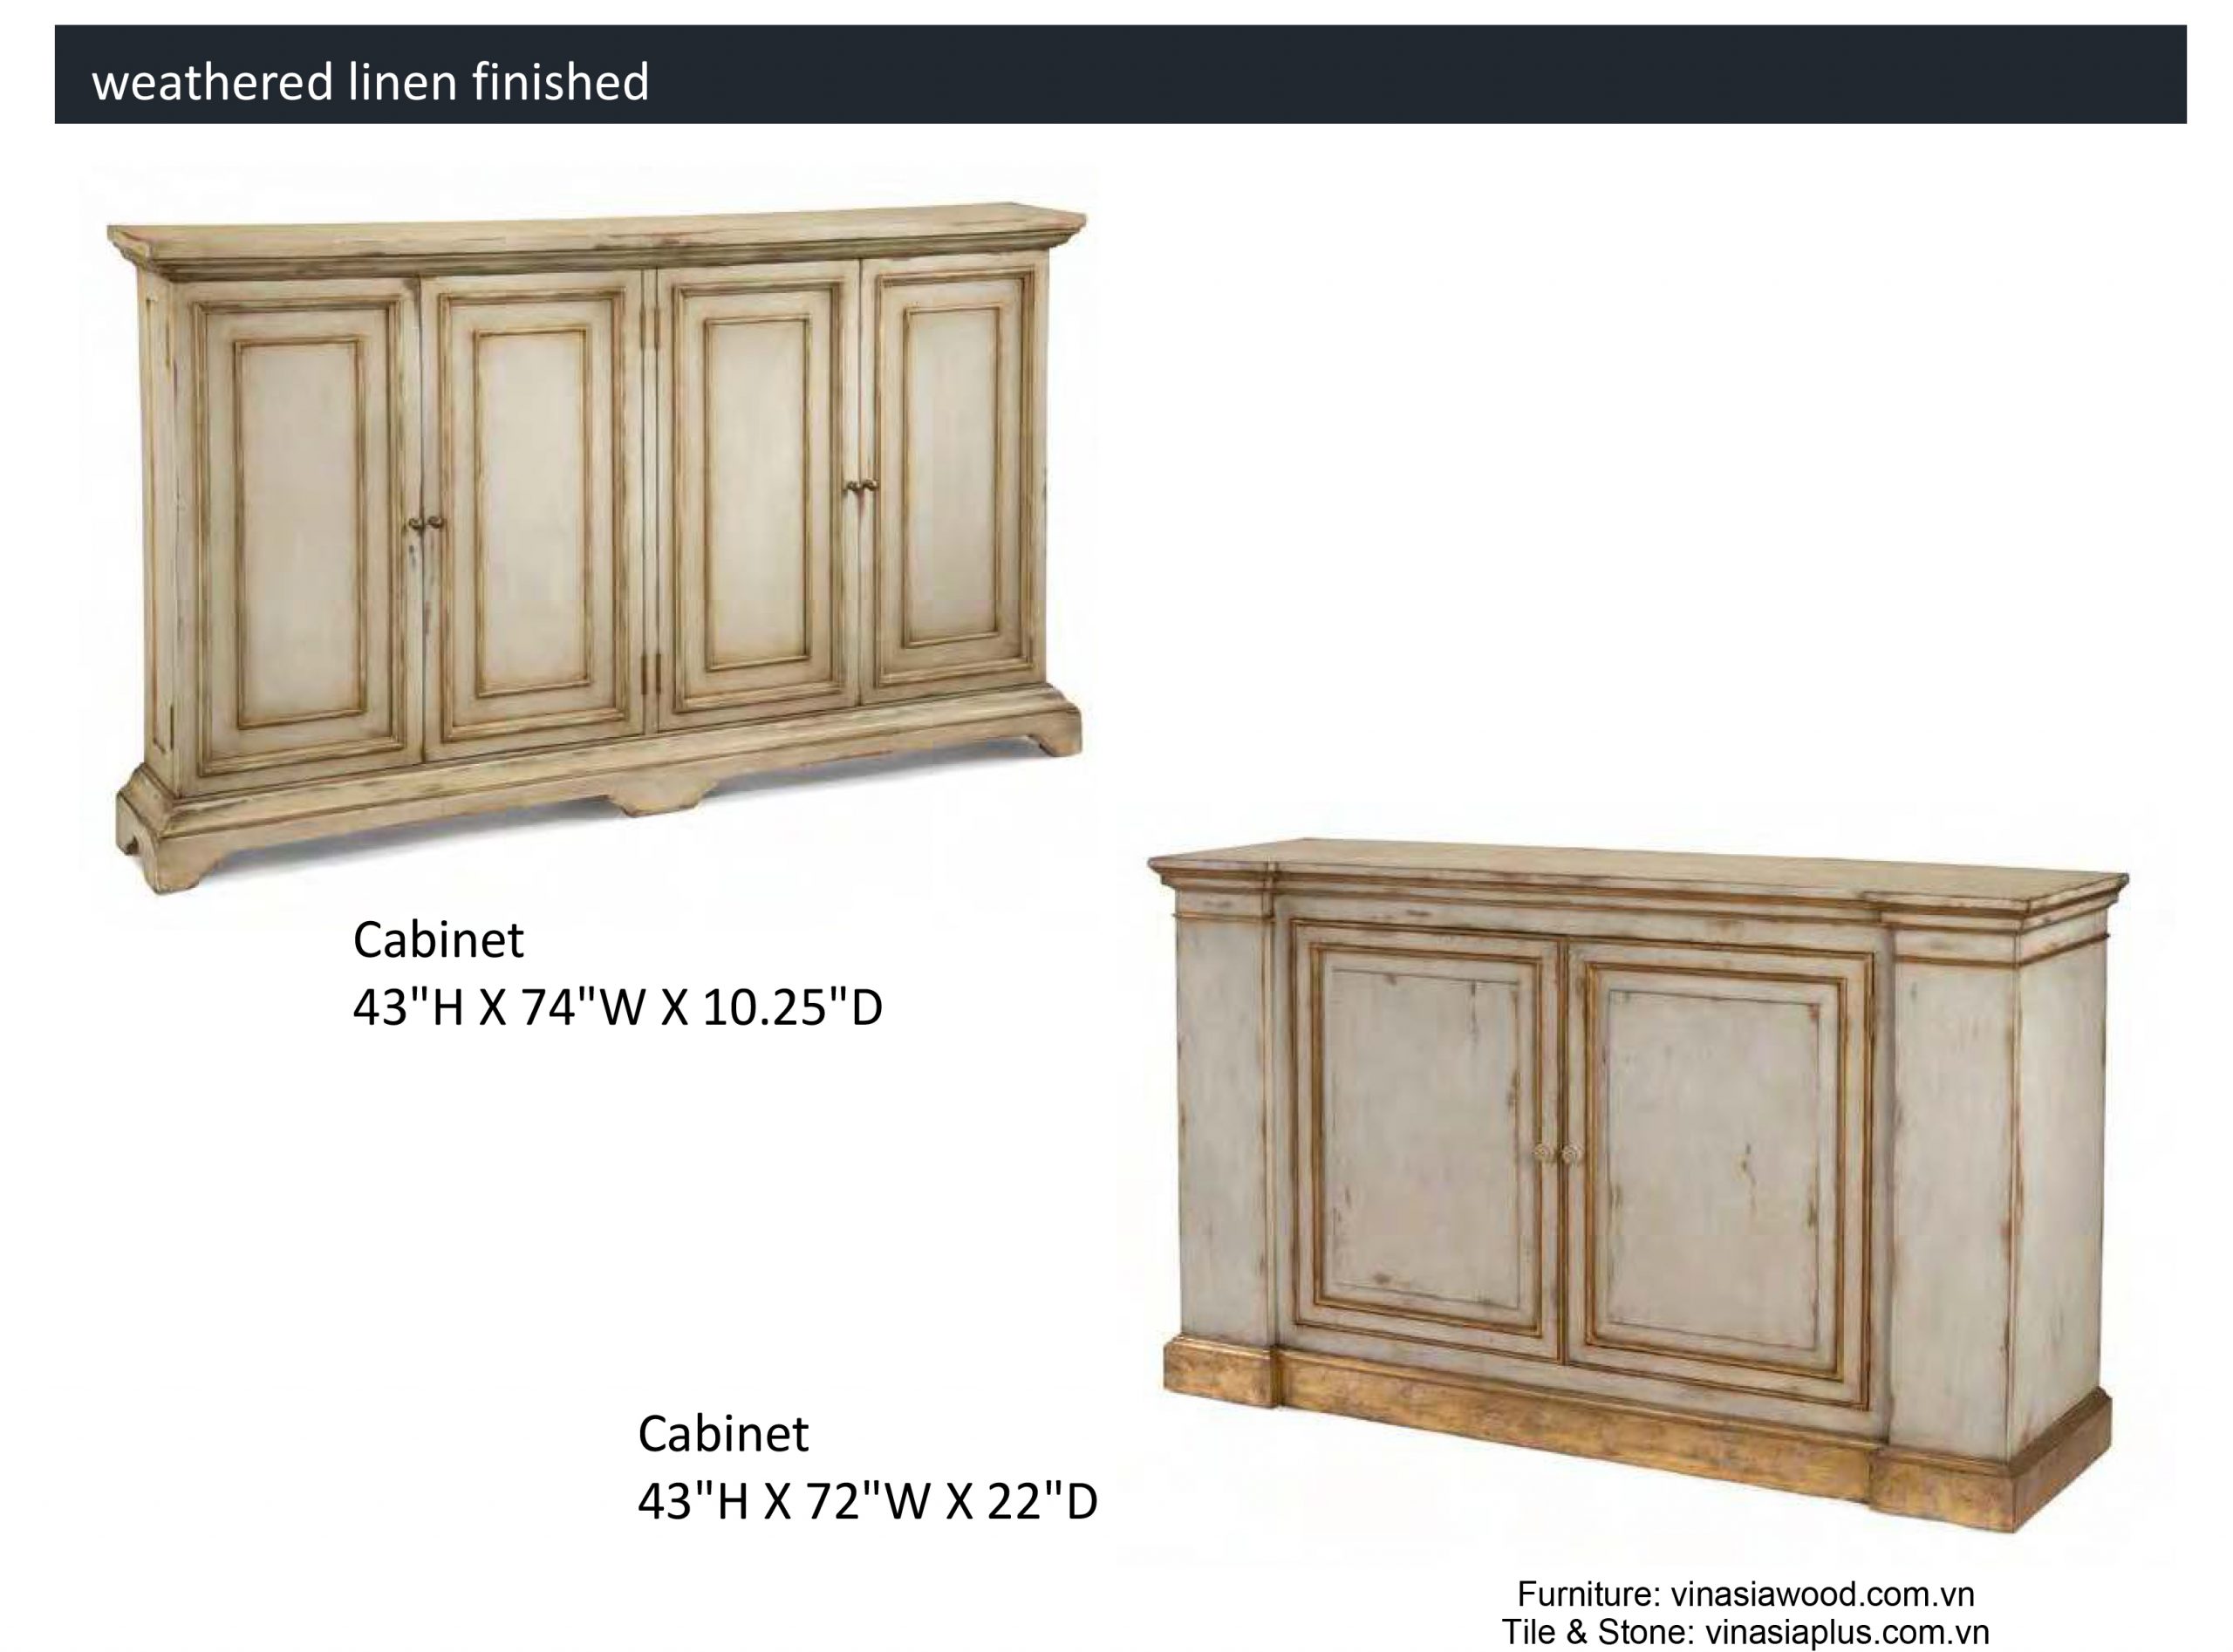 Weathered Line - Antique styles furniture Vinasia Wood